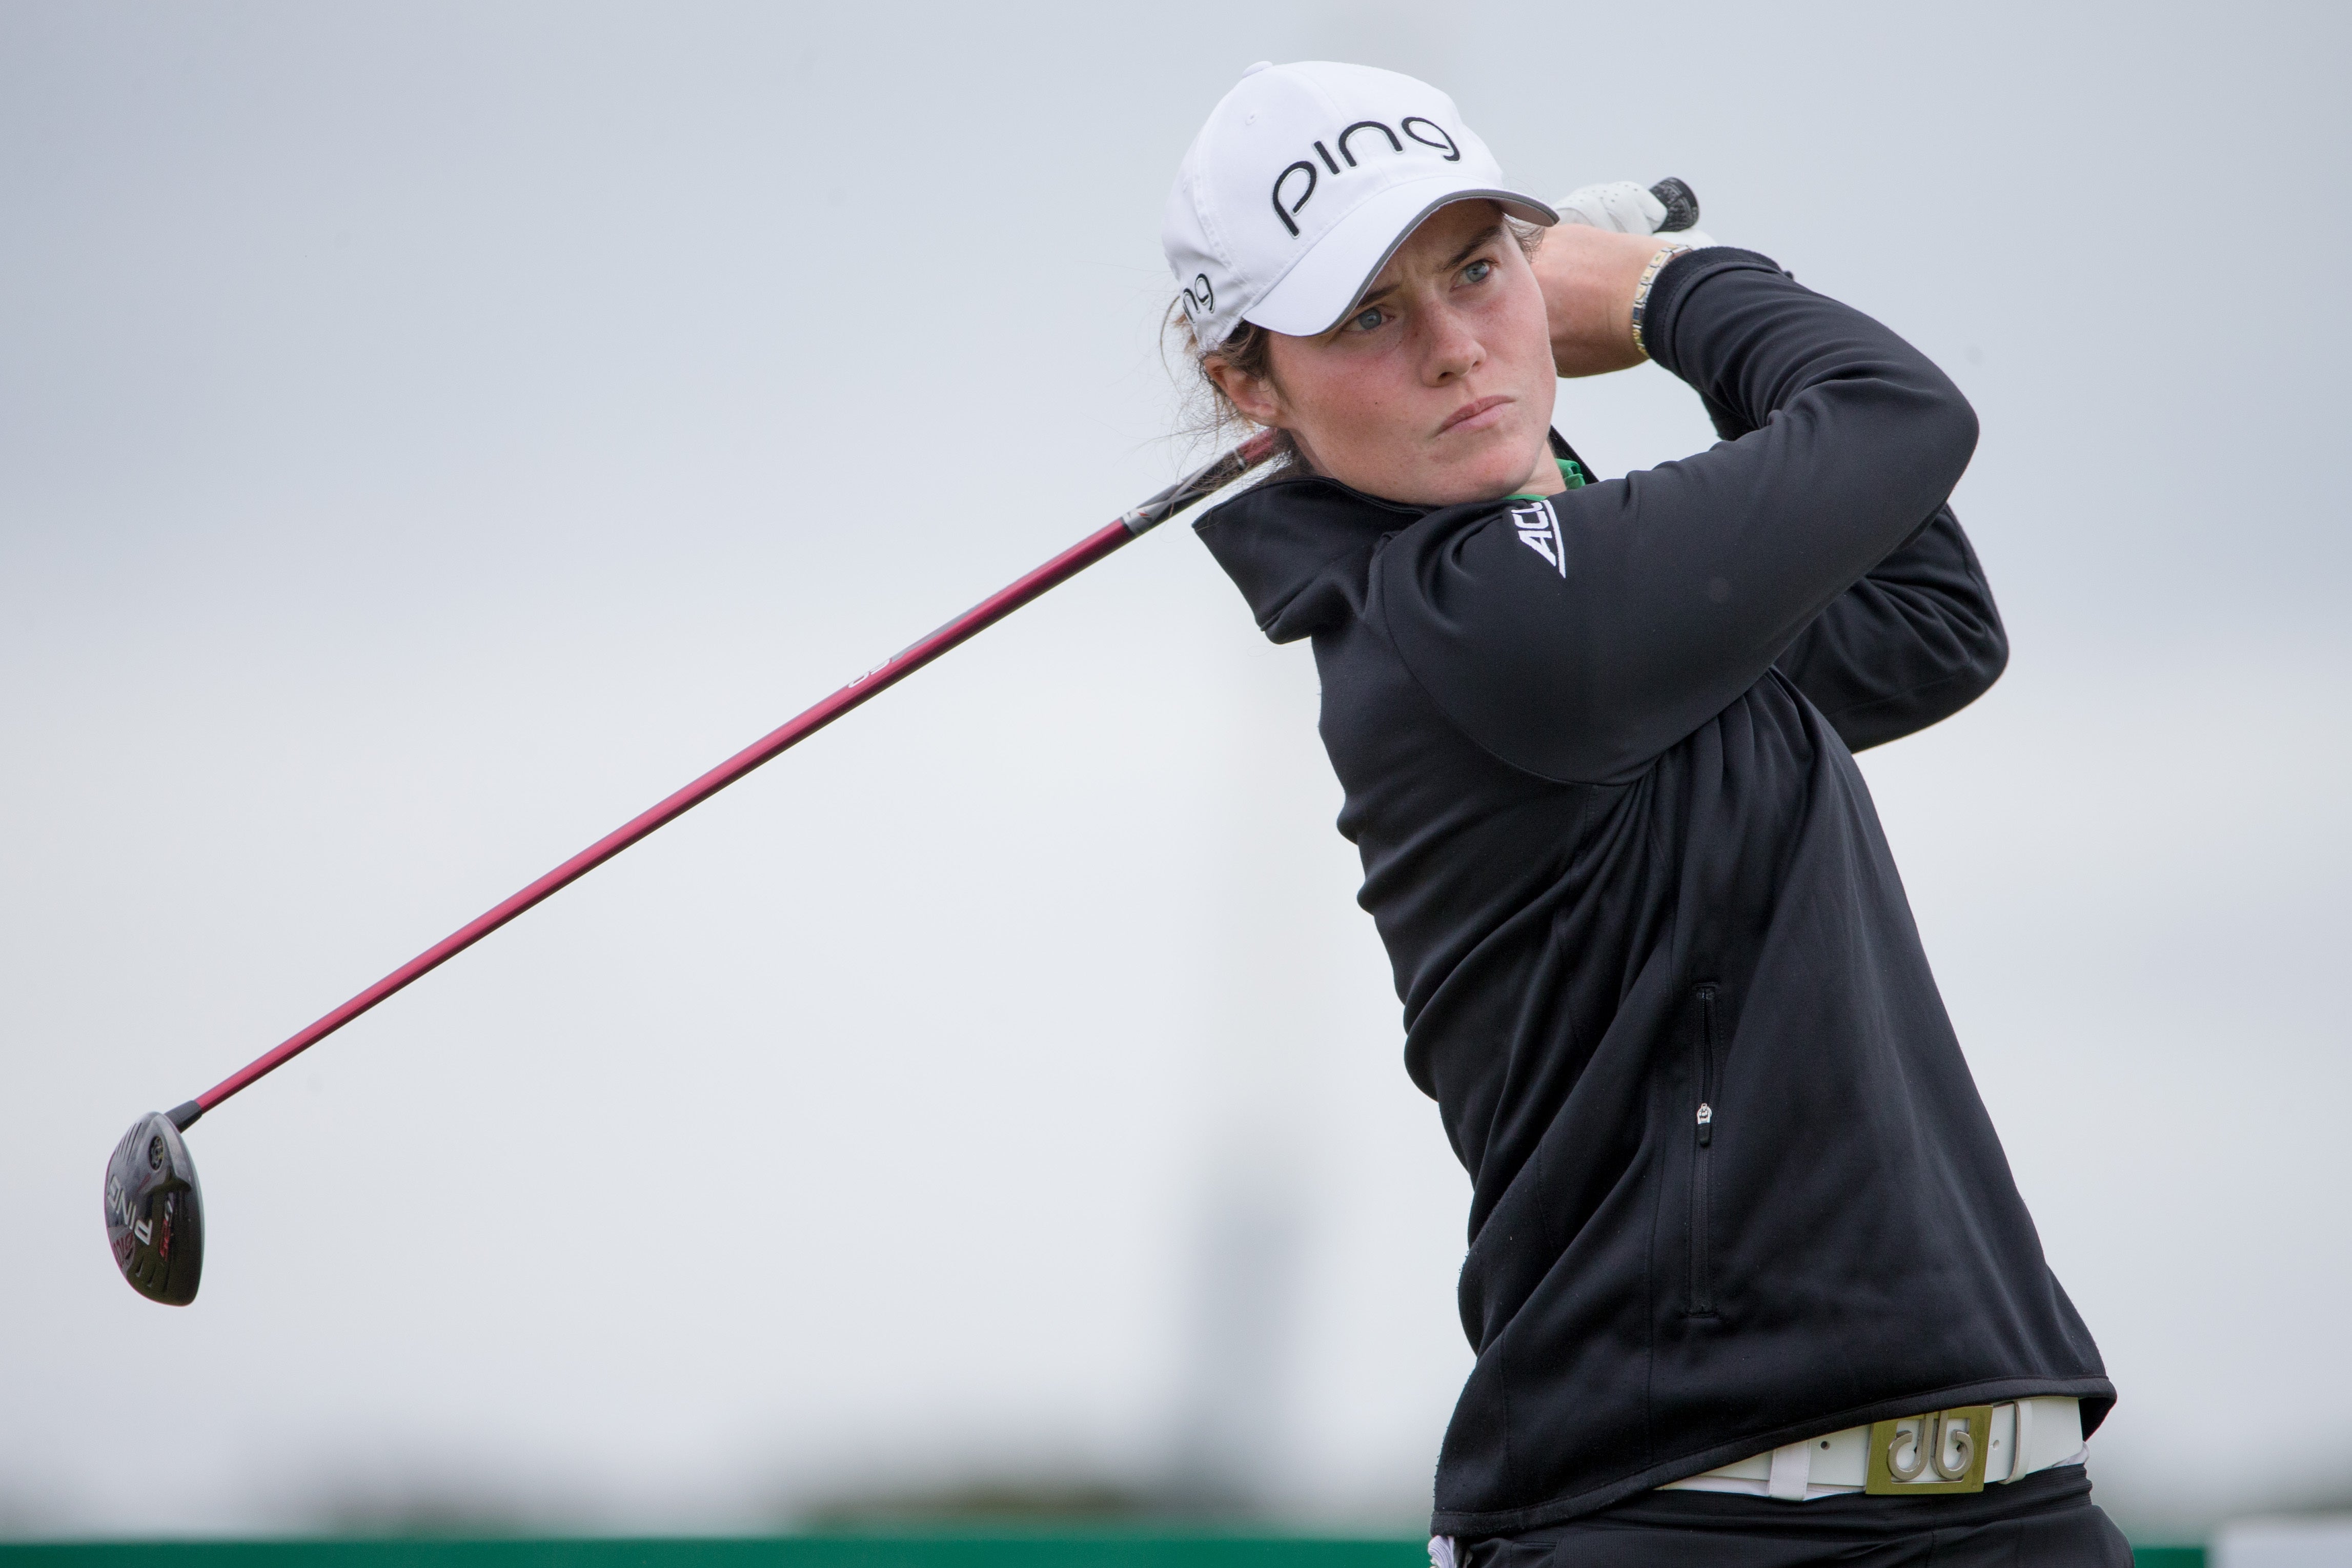 Maguire’s tie for 13th on Sunday was her ninth top-15 finish of the season